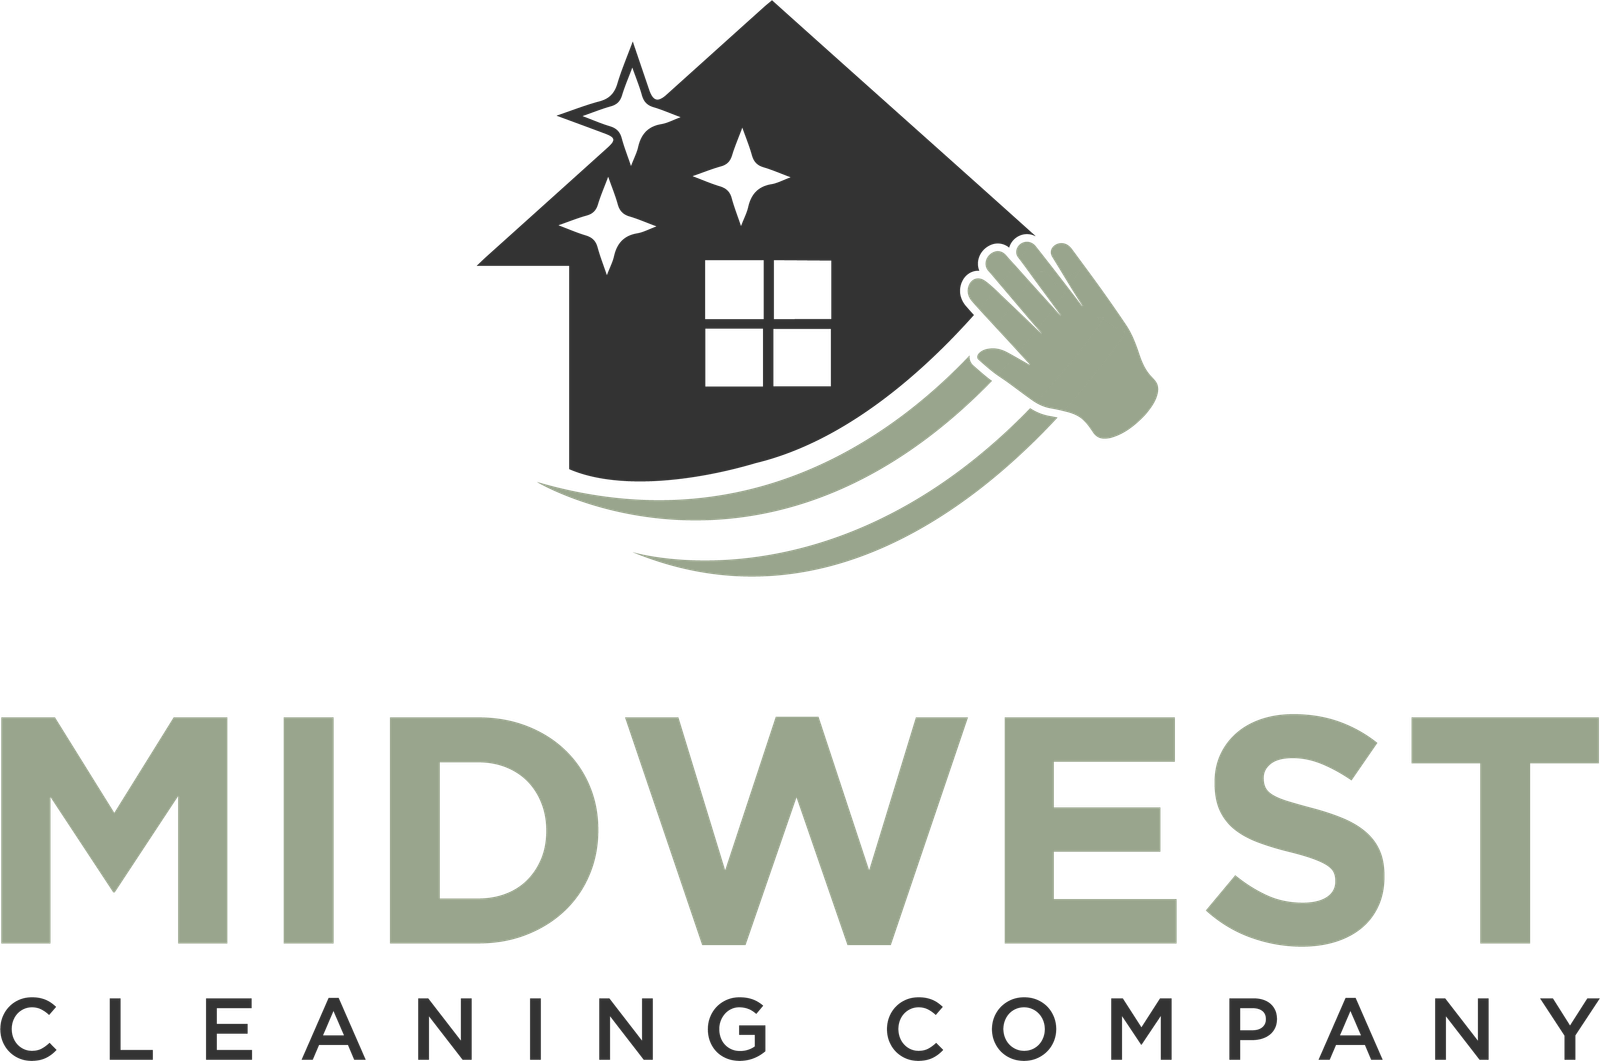 midwest cleaning company logo